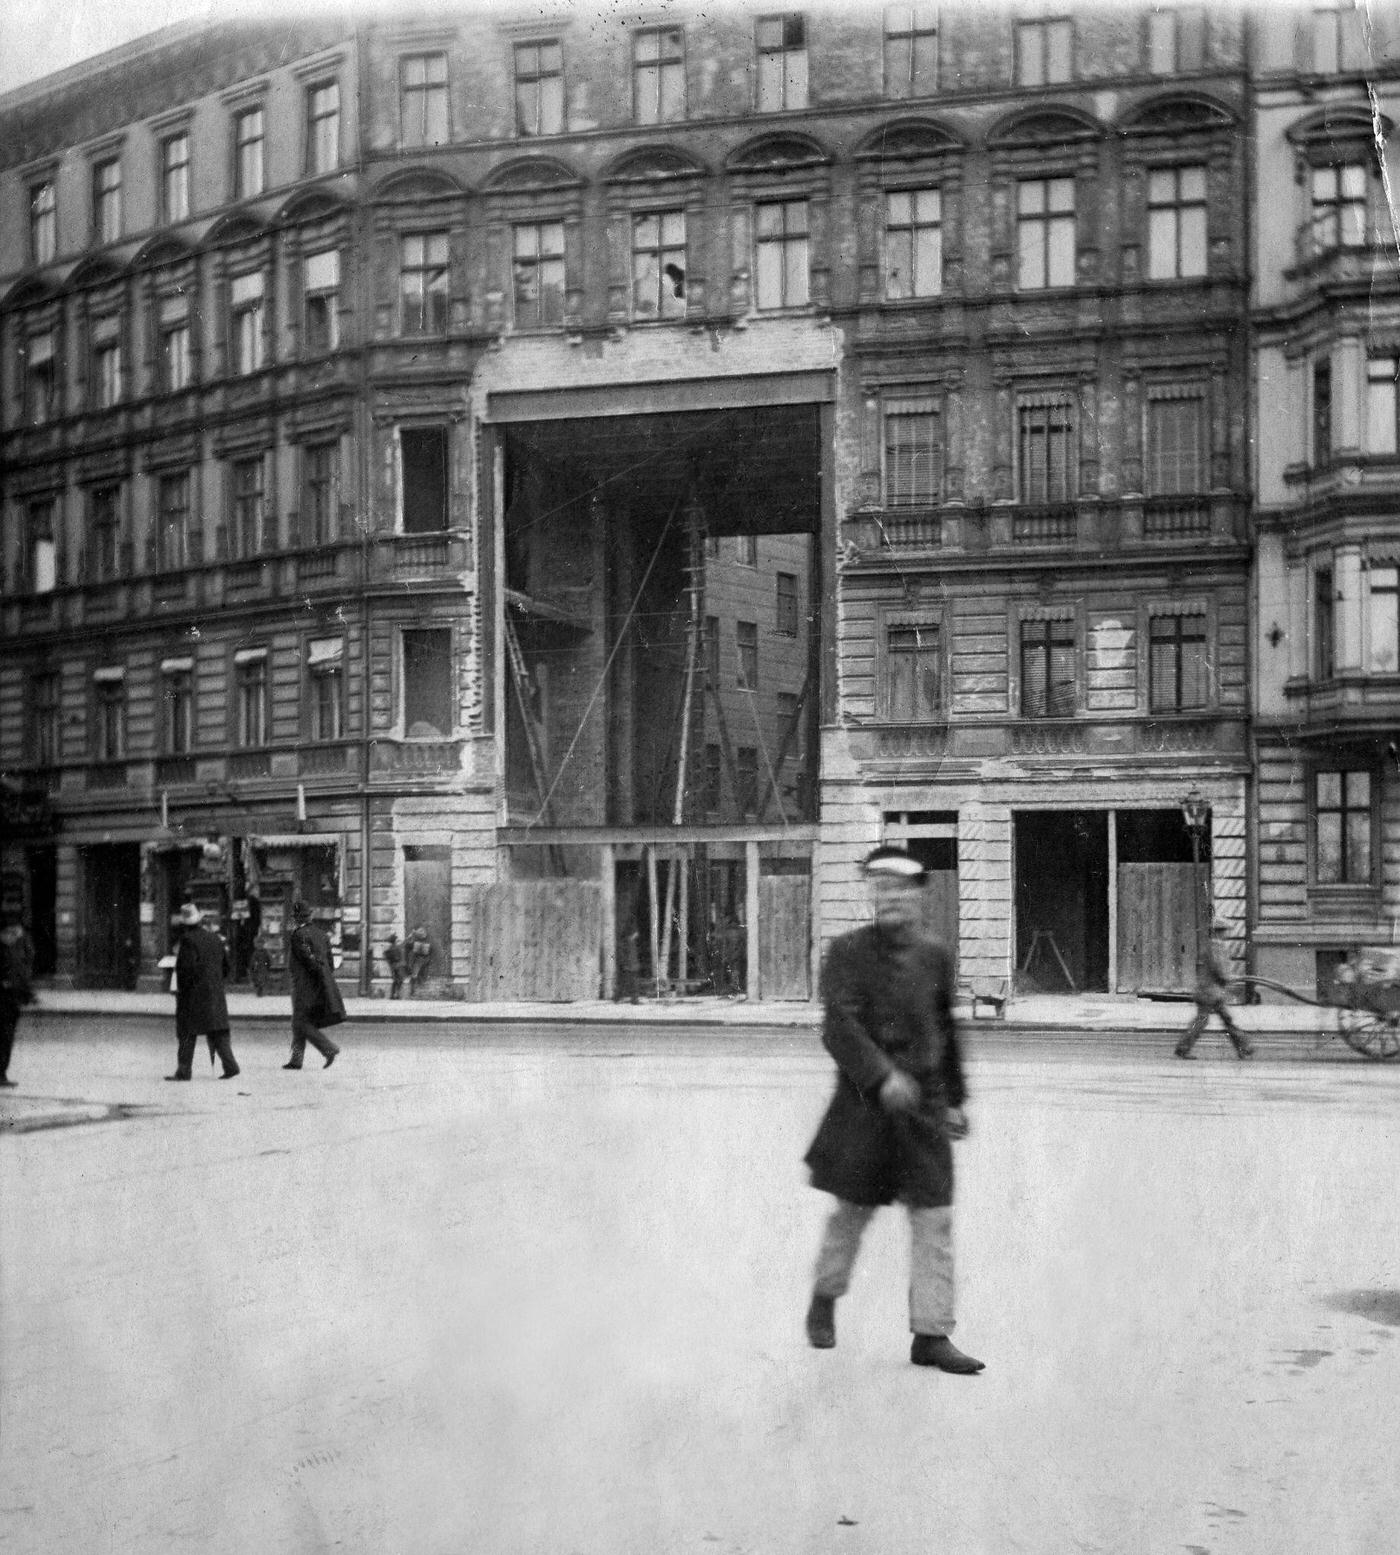 Building of the Berlin Underground, line crossing an apartment building in Buelowstrasse, Berlin